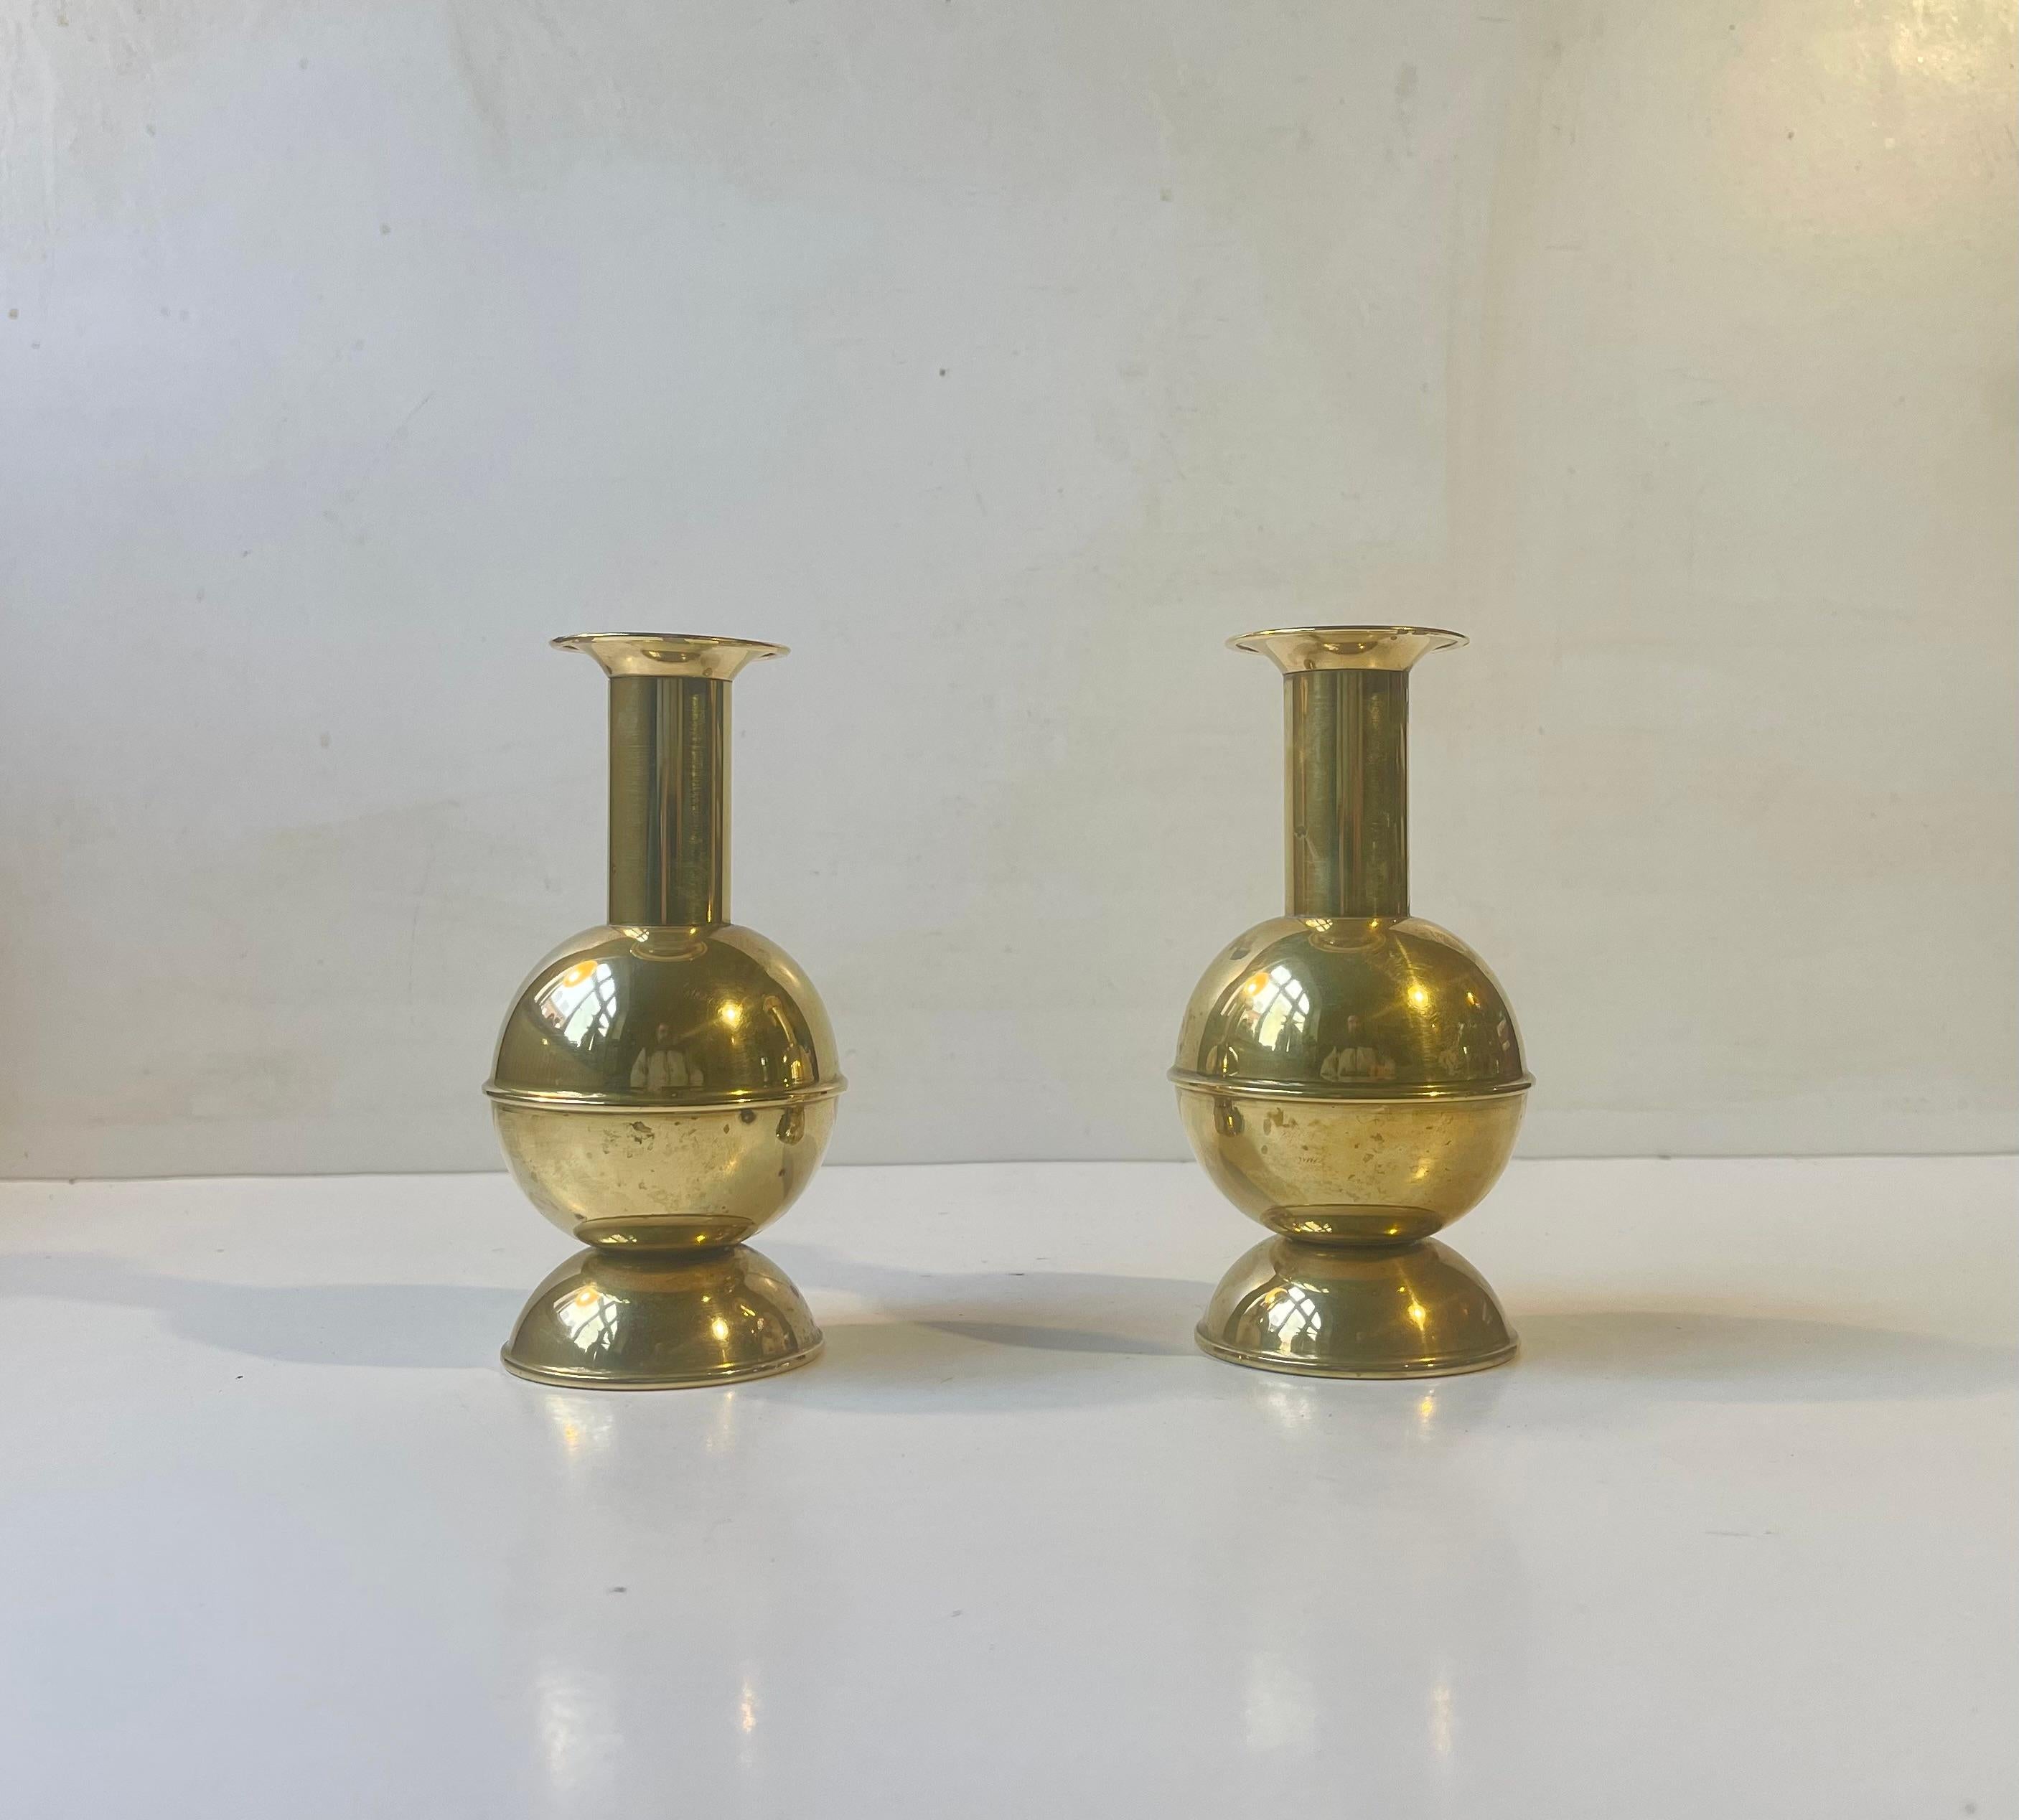 A pair of brass candlesticks designed and manufactured in Scandinavian during the 1970s. Interesting architecturally inspired 'Ball' shaped center pieces. The candlesticks are to be fitted with regular sixed candles. The style of this set is